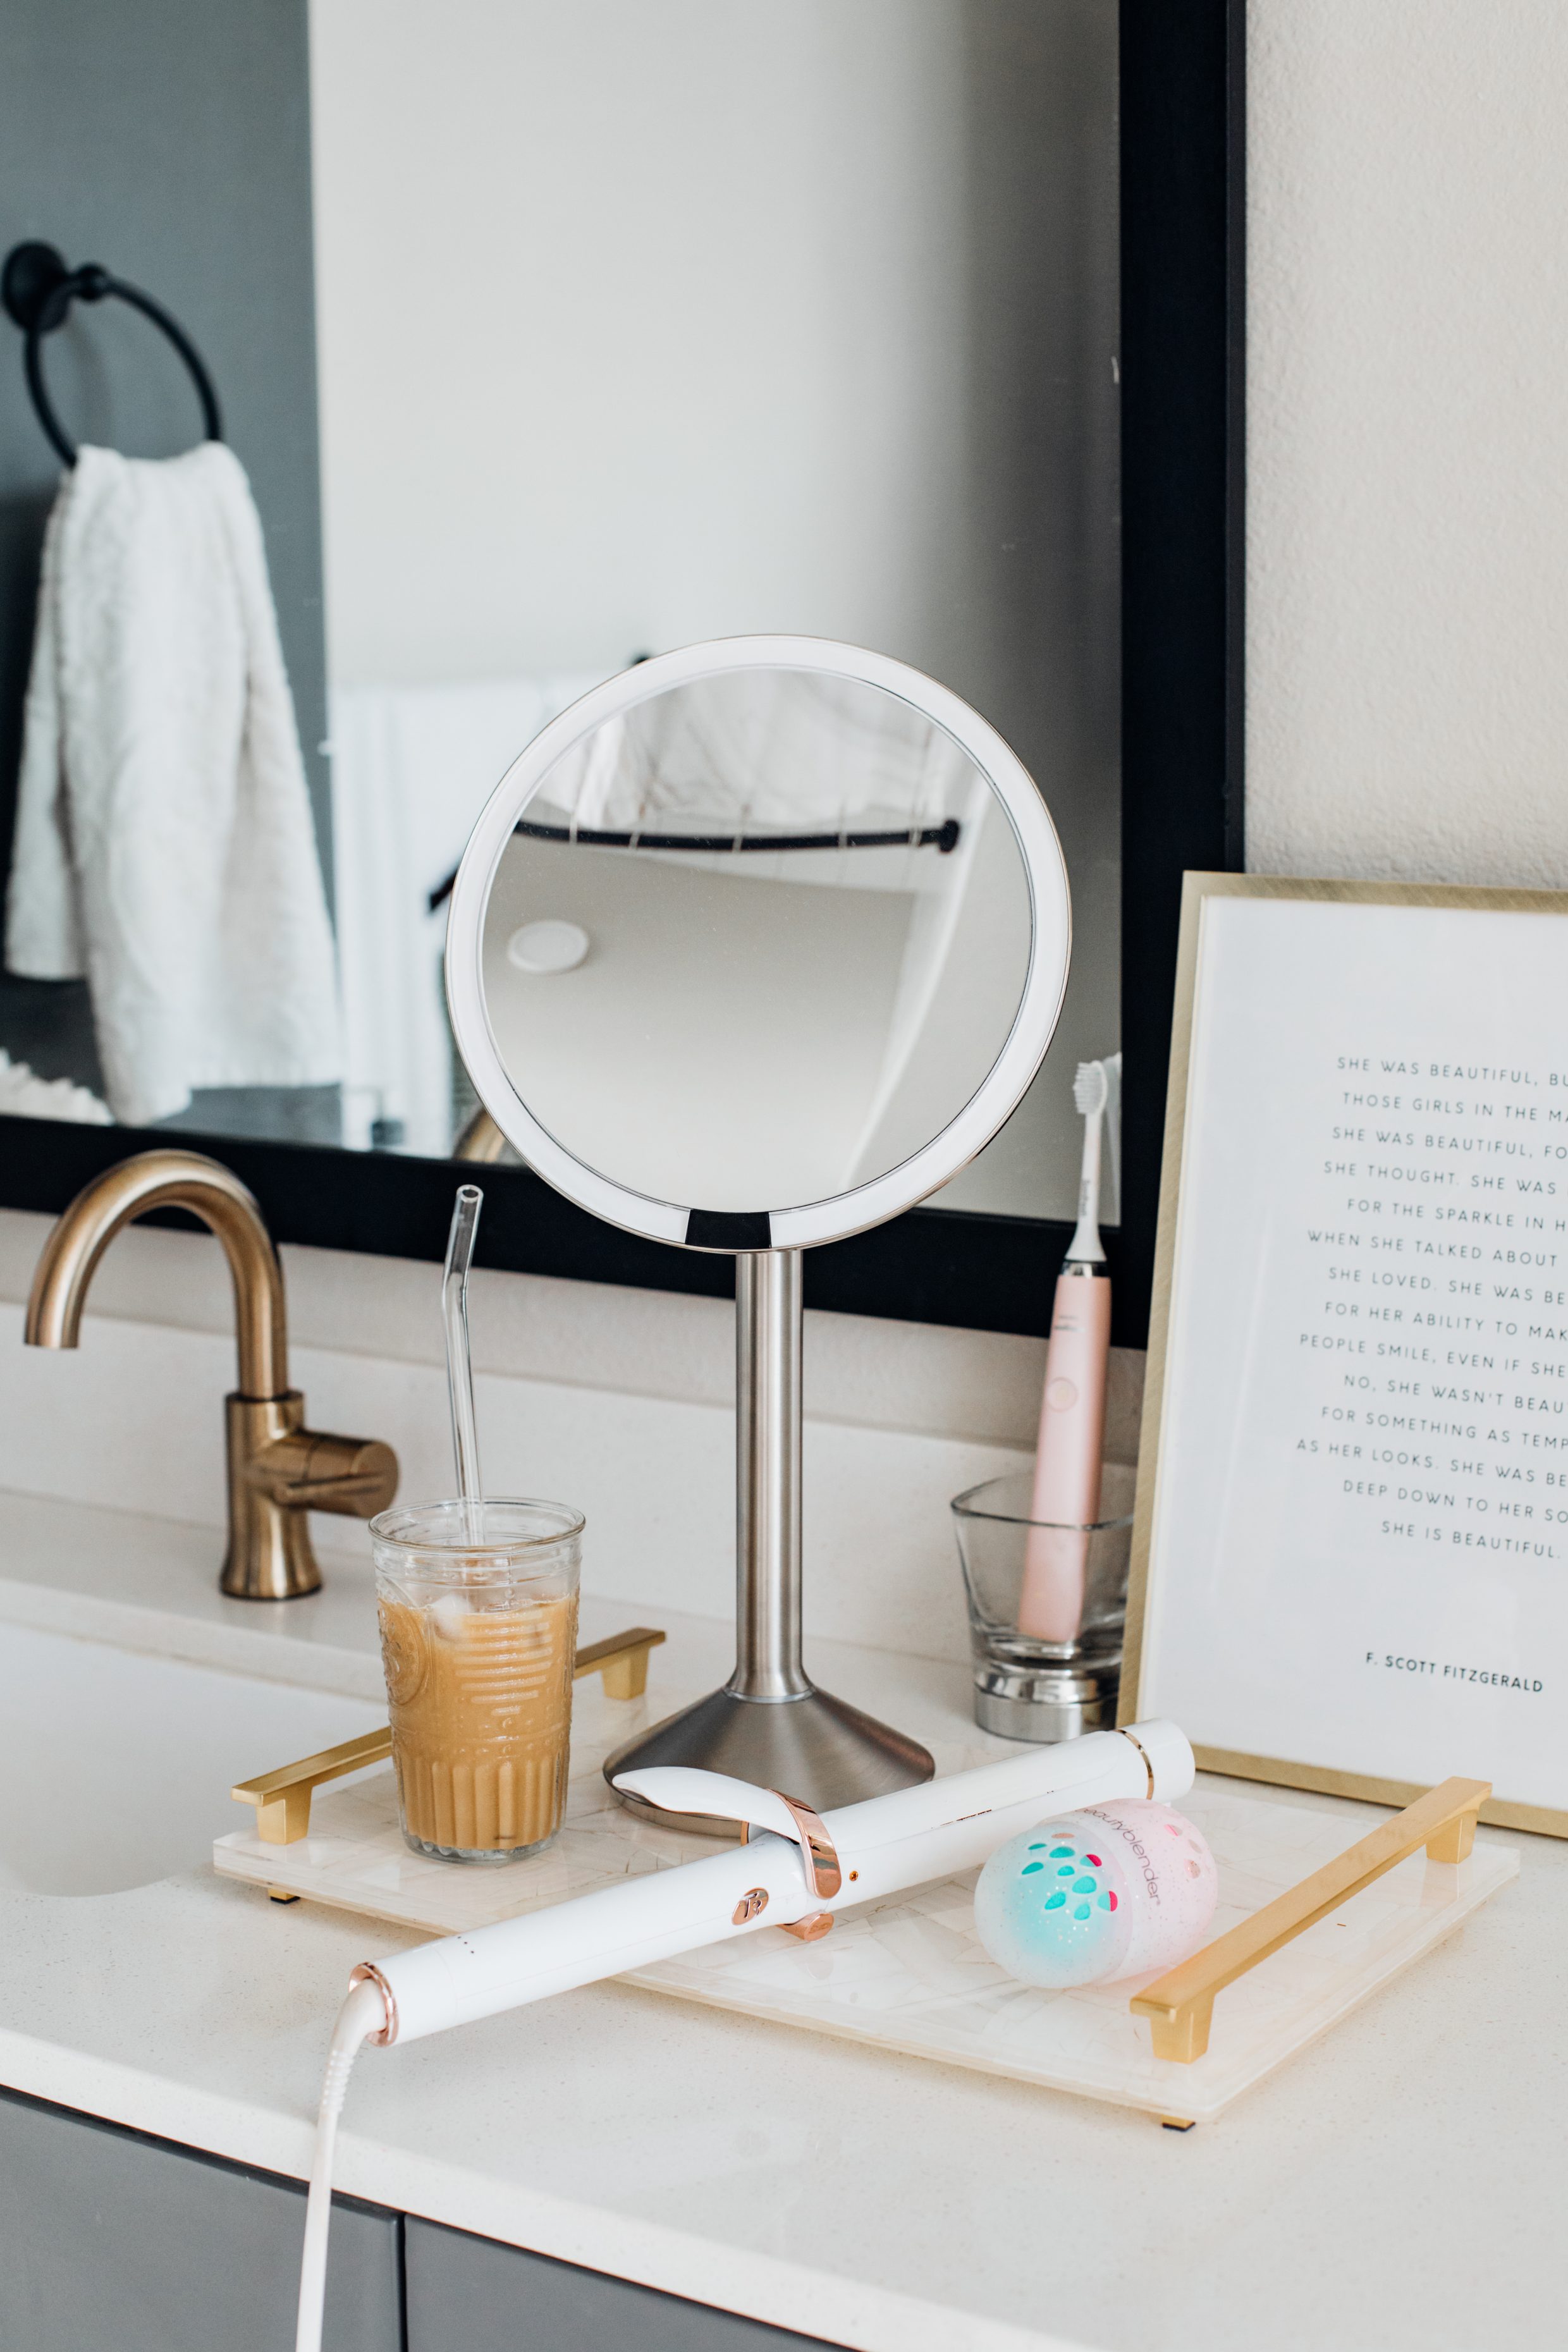 Top beauty picks for the Nordstrom Anniversary Sale 2019 - simplehuman sensor mirror, T3 curling iron in a bathroom in a Dallas apartment